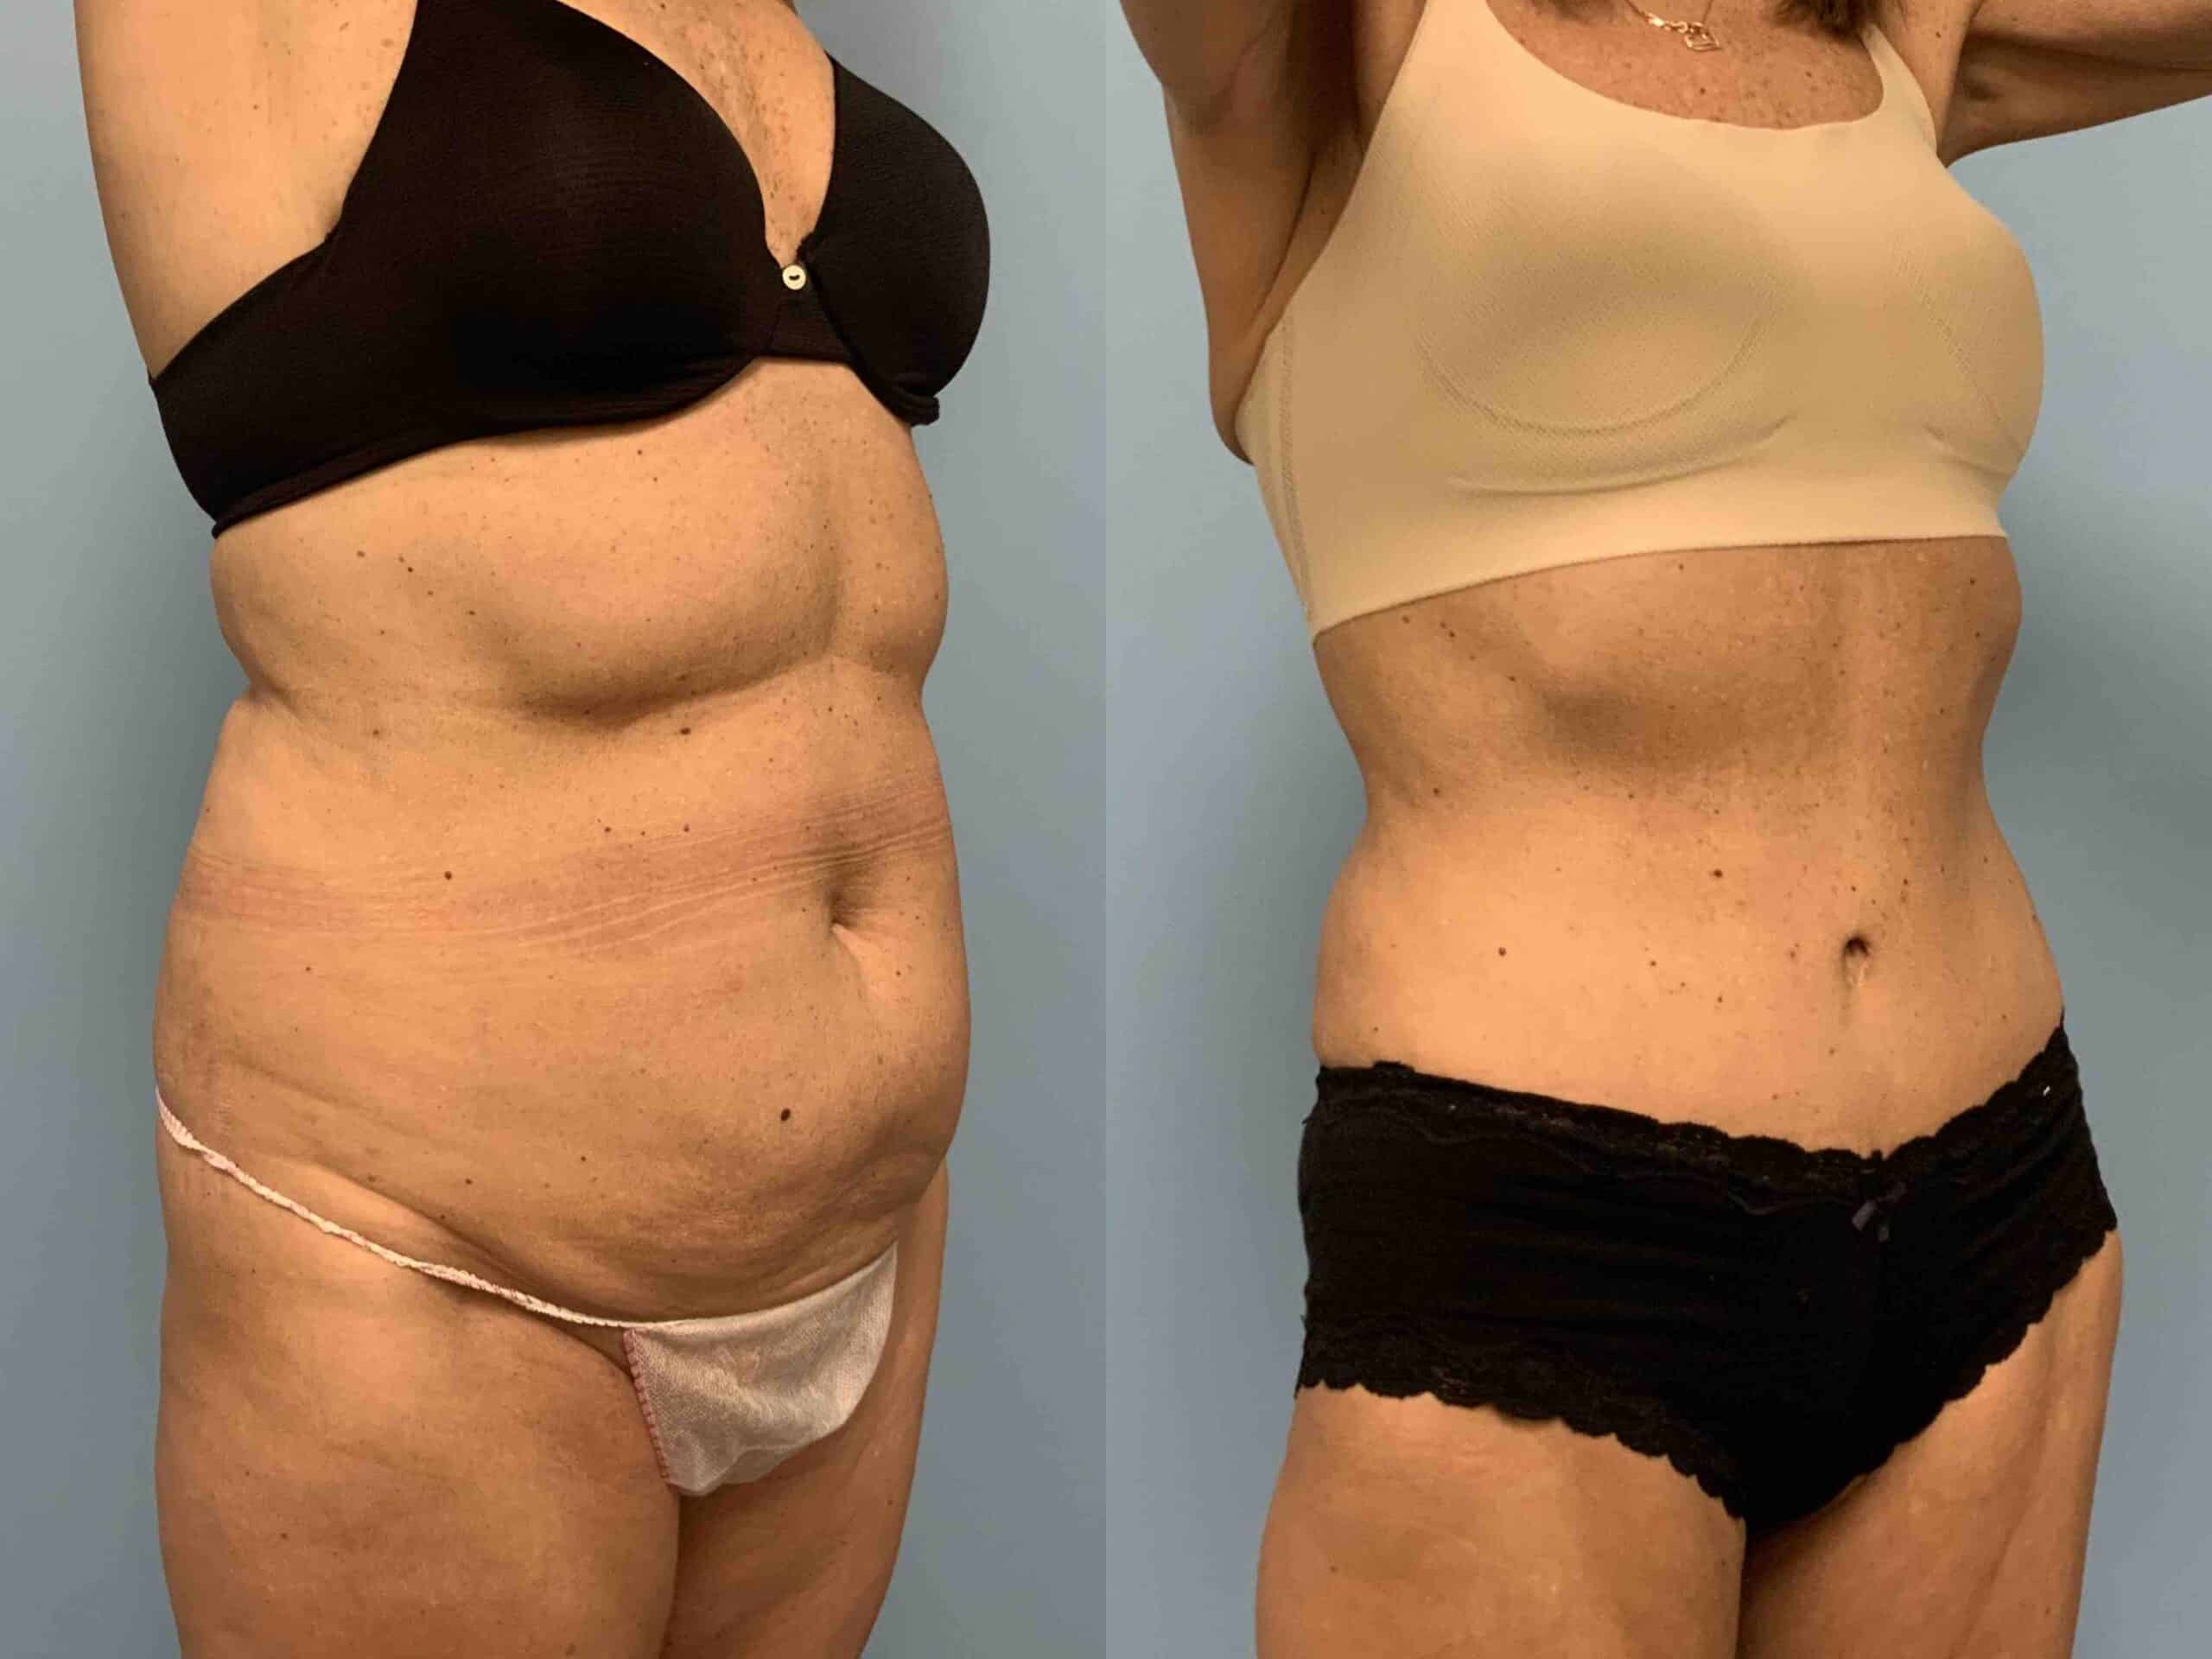 Before and after, 10 mo post op from Tummy Tuck, VASER Abdomen, Flanks, and Mons performed by Dr. Paul Vanek (diagonal view)